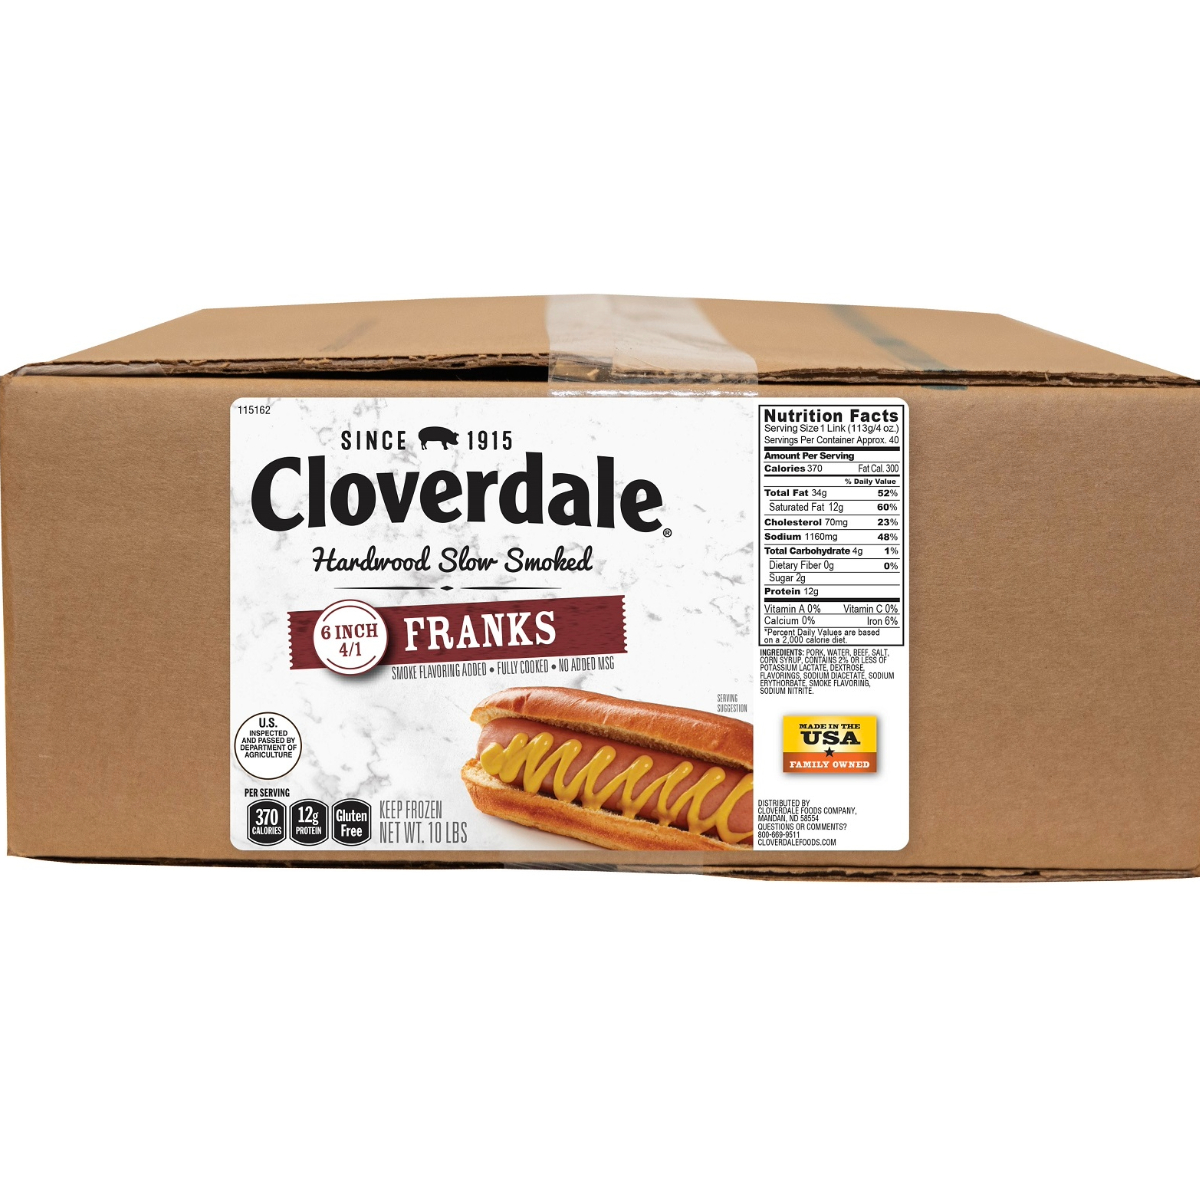 CLOVERDALE MEAT HOT DOGS 6 INCH 4/1 FRANKS